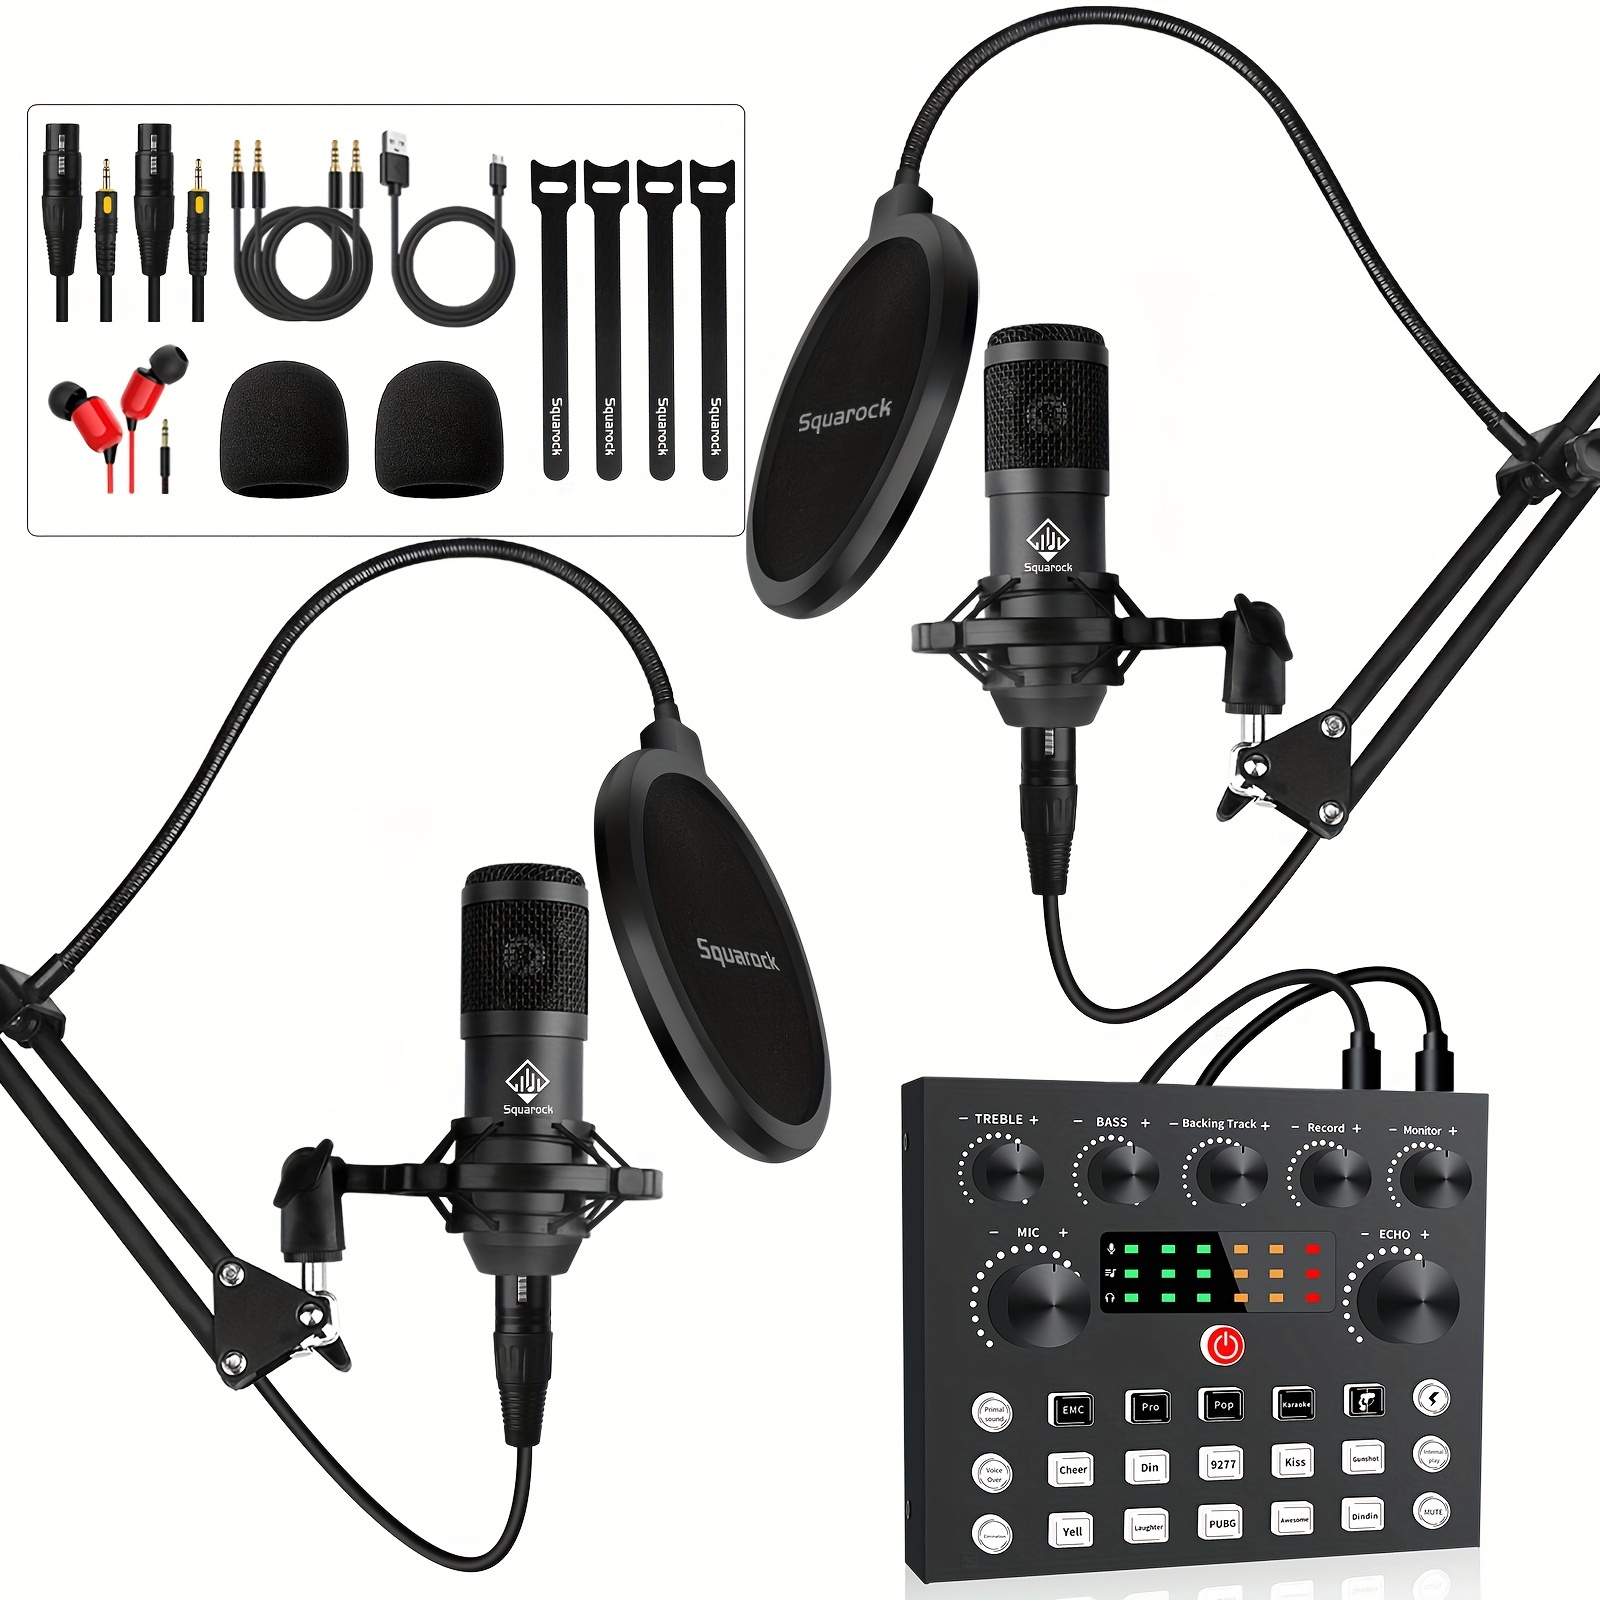 

Podcast Equipment Bundle For 2